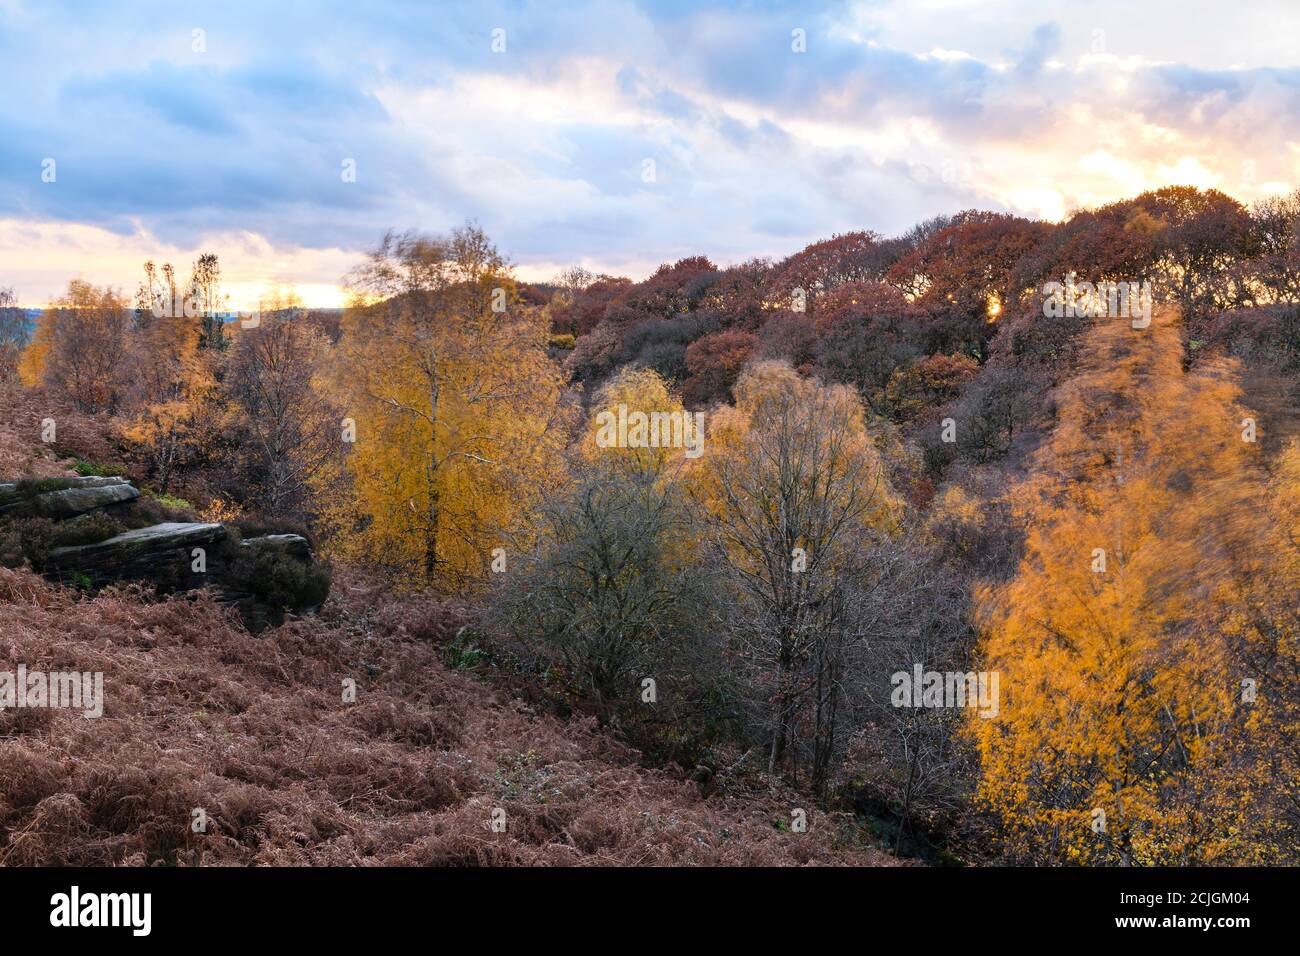 Autumn colours, scenic rural woodland valley, trees on steep hillsides, colourful leaves & sunset sky - Shipley Glen, West Yorkshire, England, UK. Stock Photo